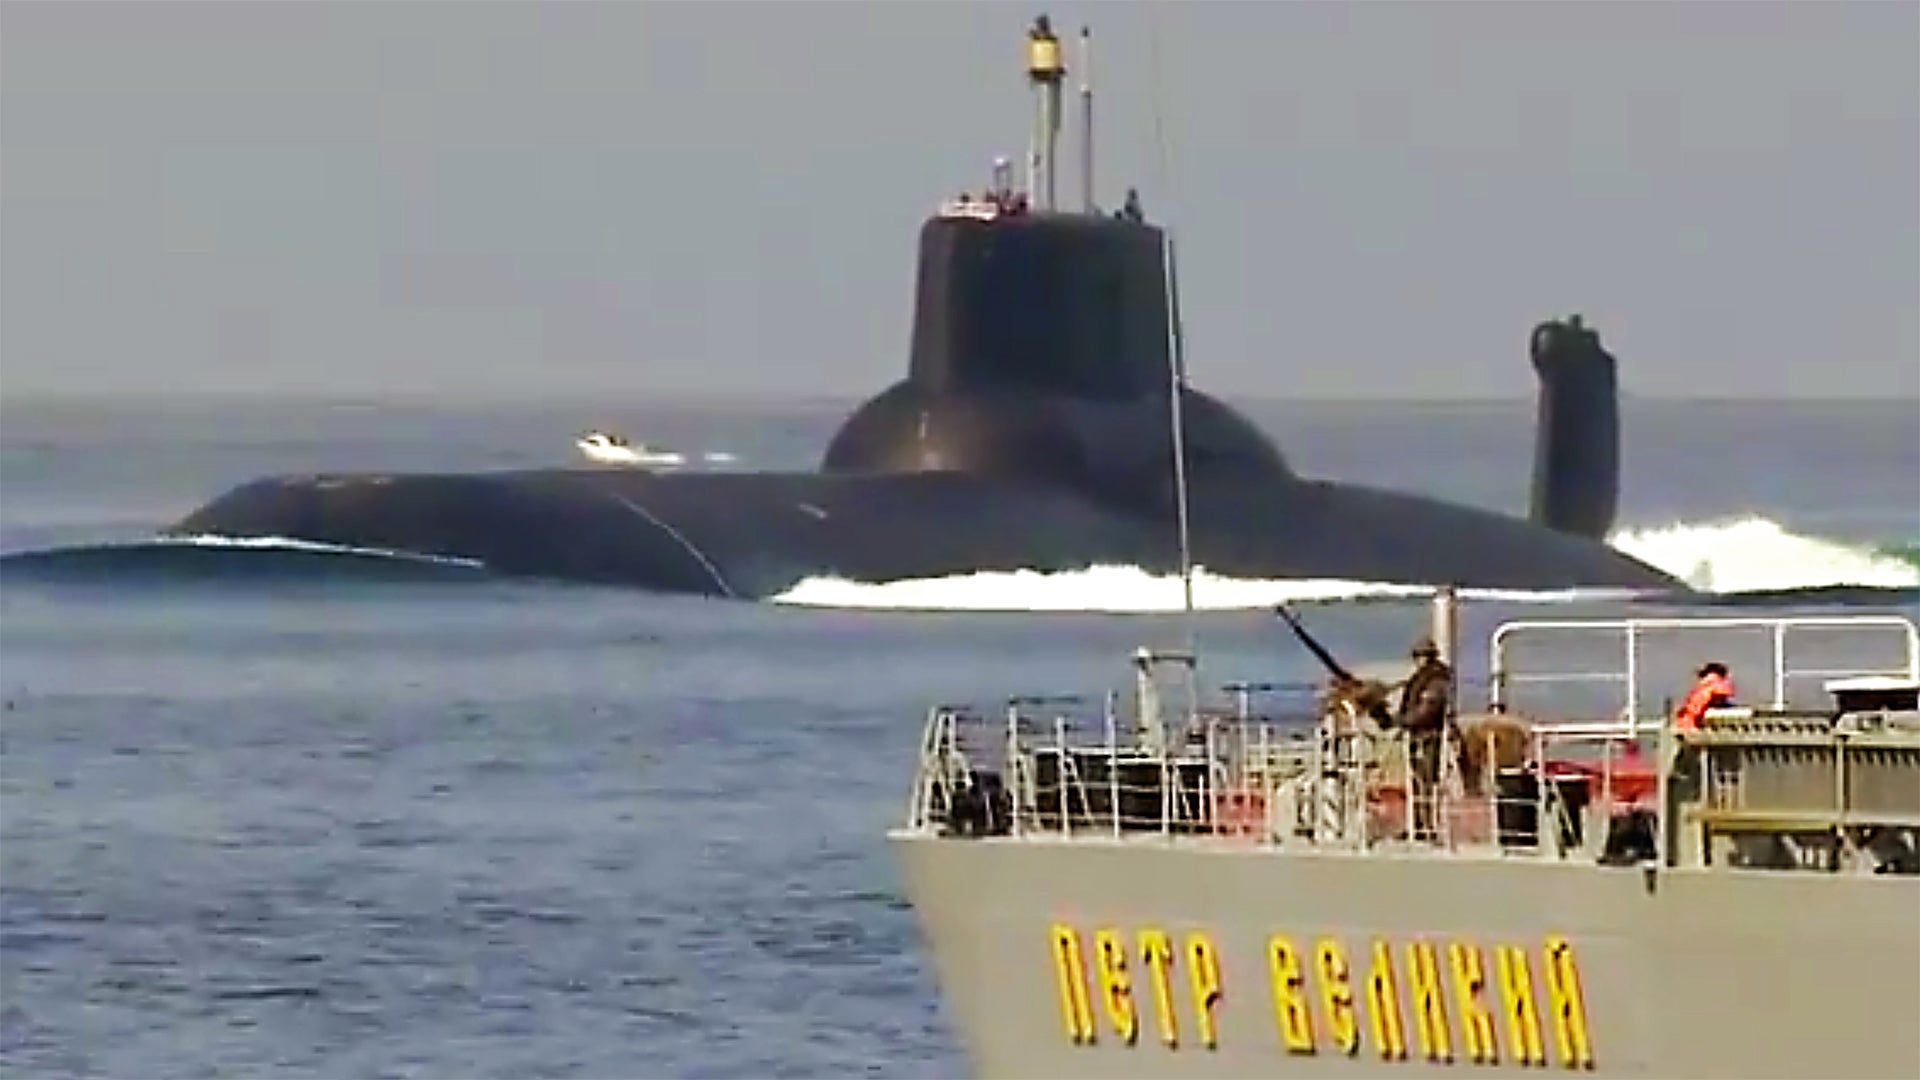 Check Out The World’s Largest Submarine As It Sails Into The Tense Baltic Sea